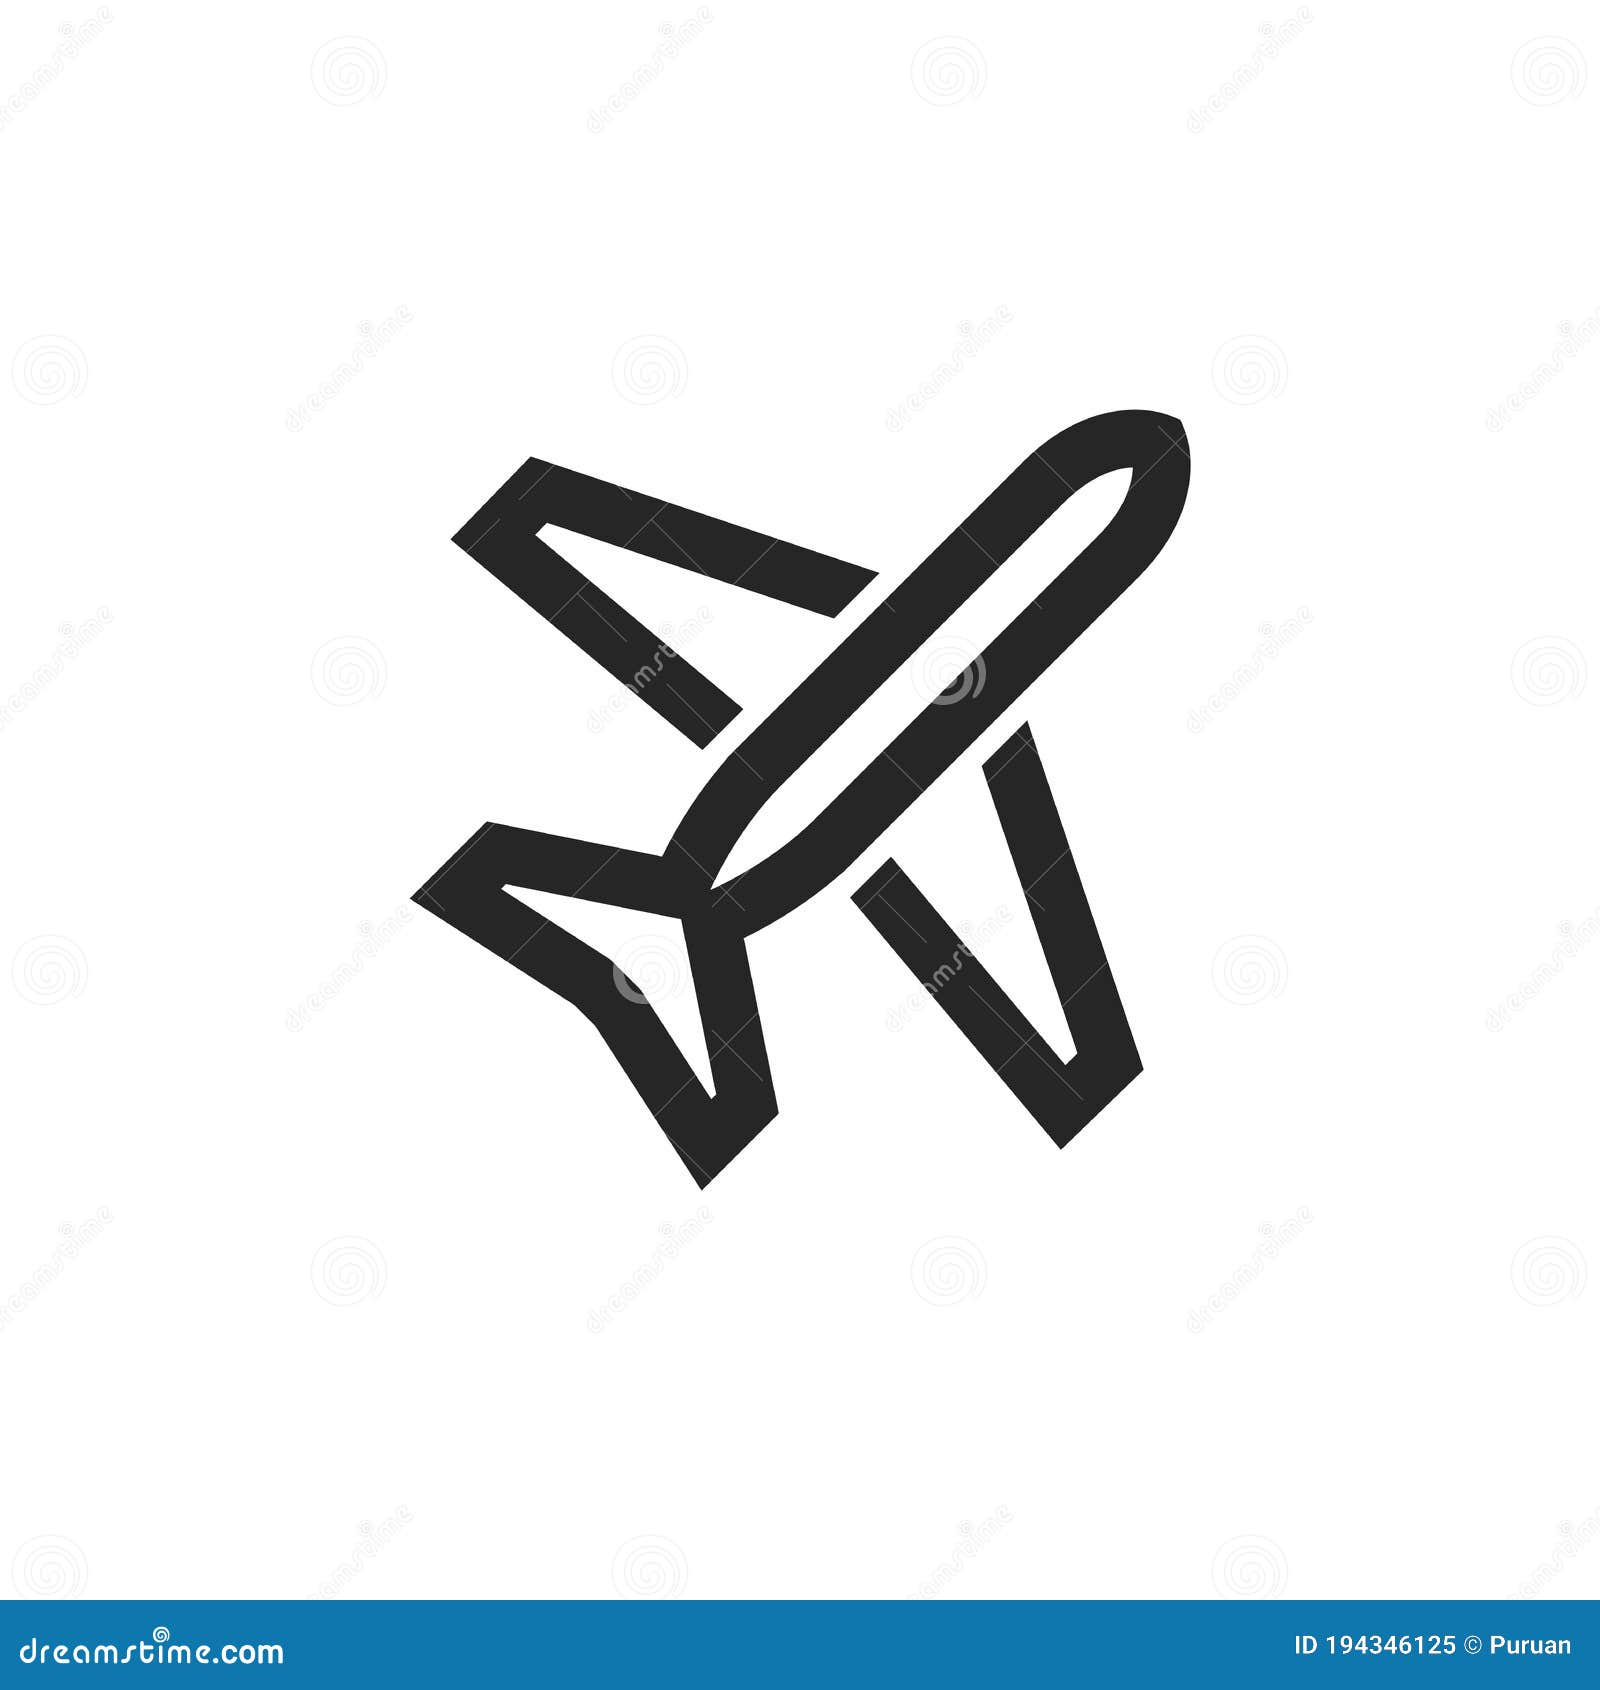 Outline Icon - Airplane stock vector. Illustration of sign - 194346125